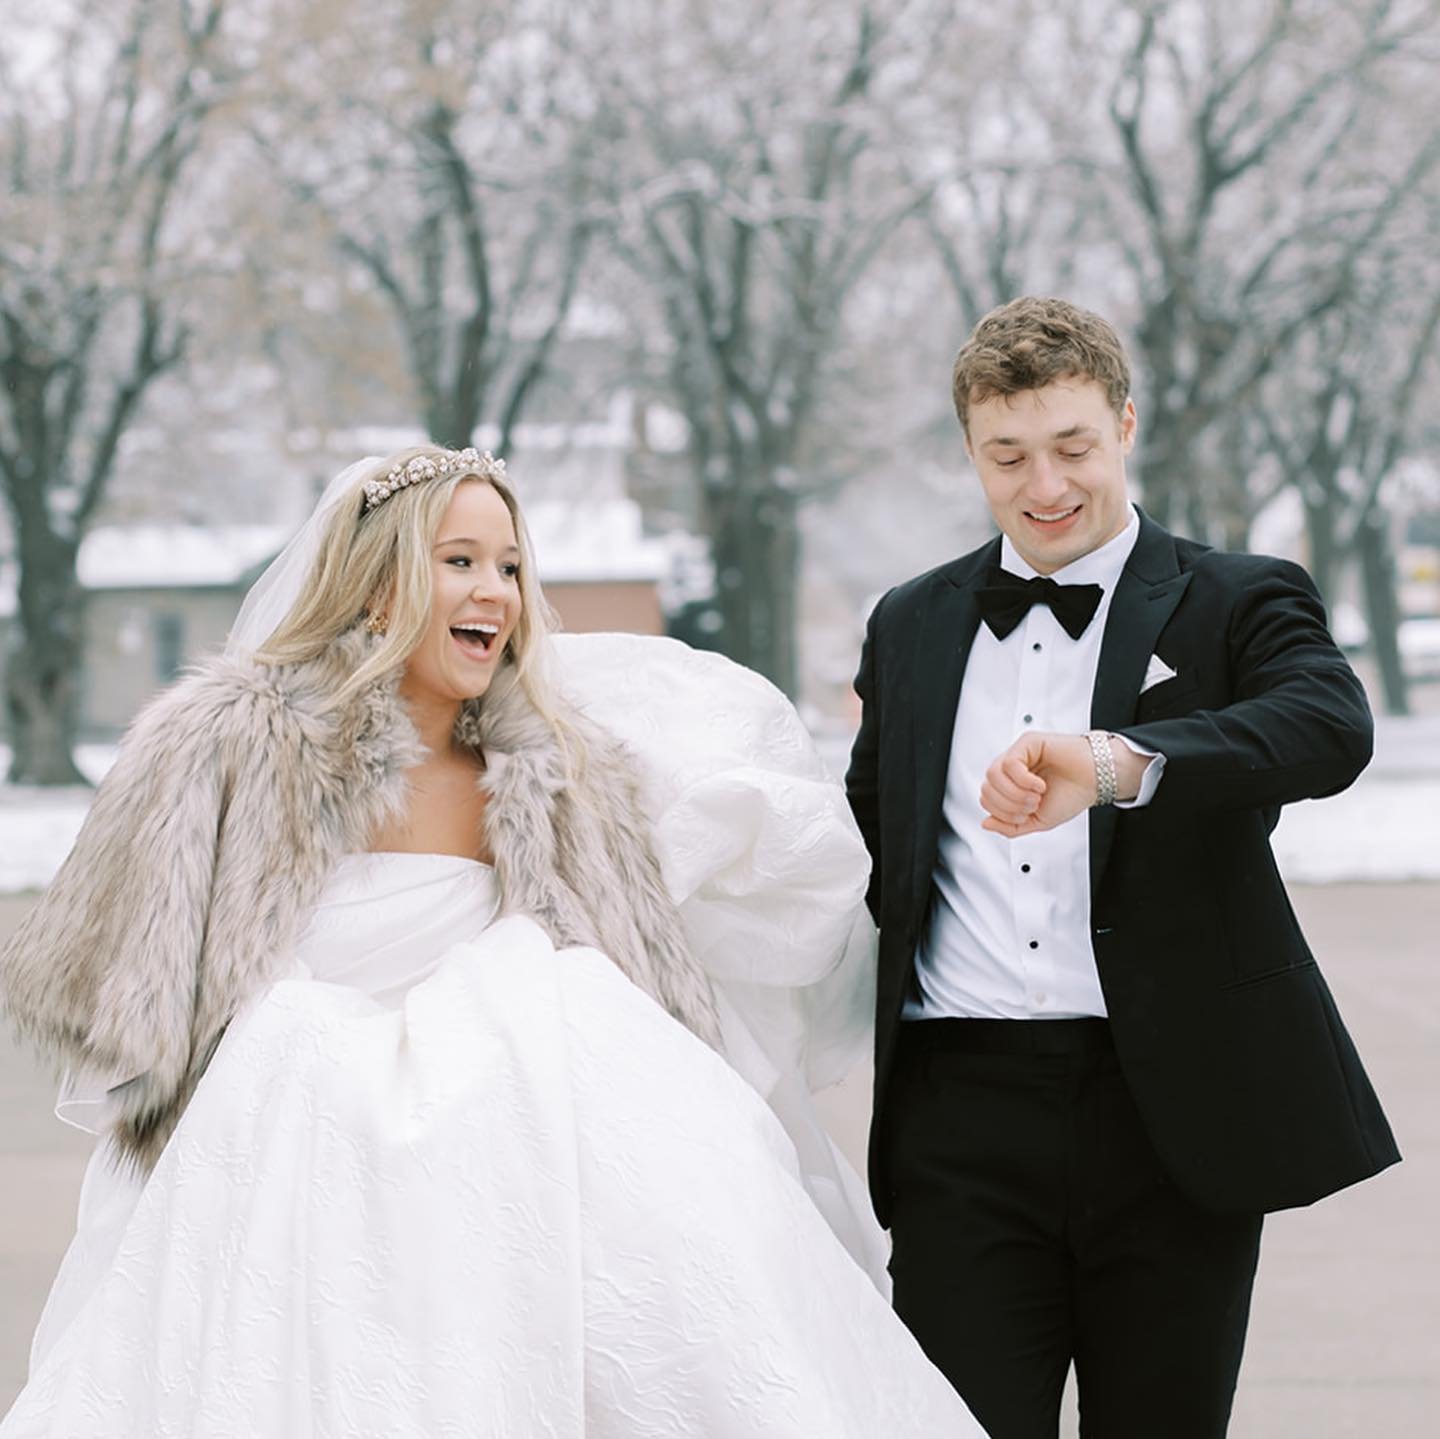 When it&rsquo;s wedding TIME 🤍⏱️ these two darlings bopping around town on their wintery midwest wedding day! I love Ryan&rsquo;s reaction to realizing we were PERFECTLY on time to head to the chapel to say  I DO!

I scouted their location before th